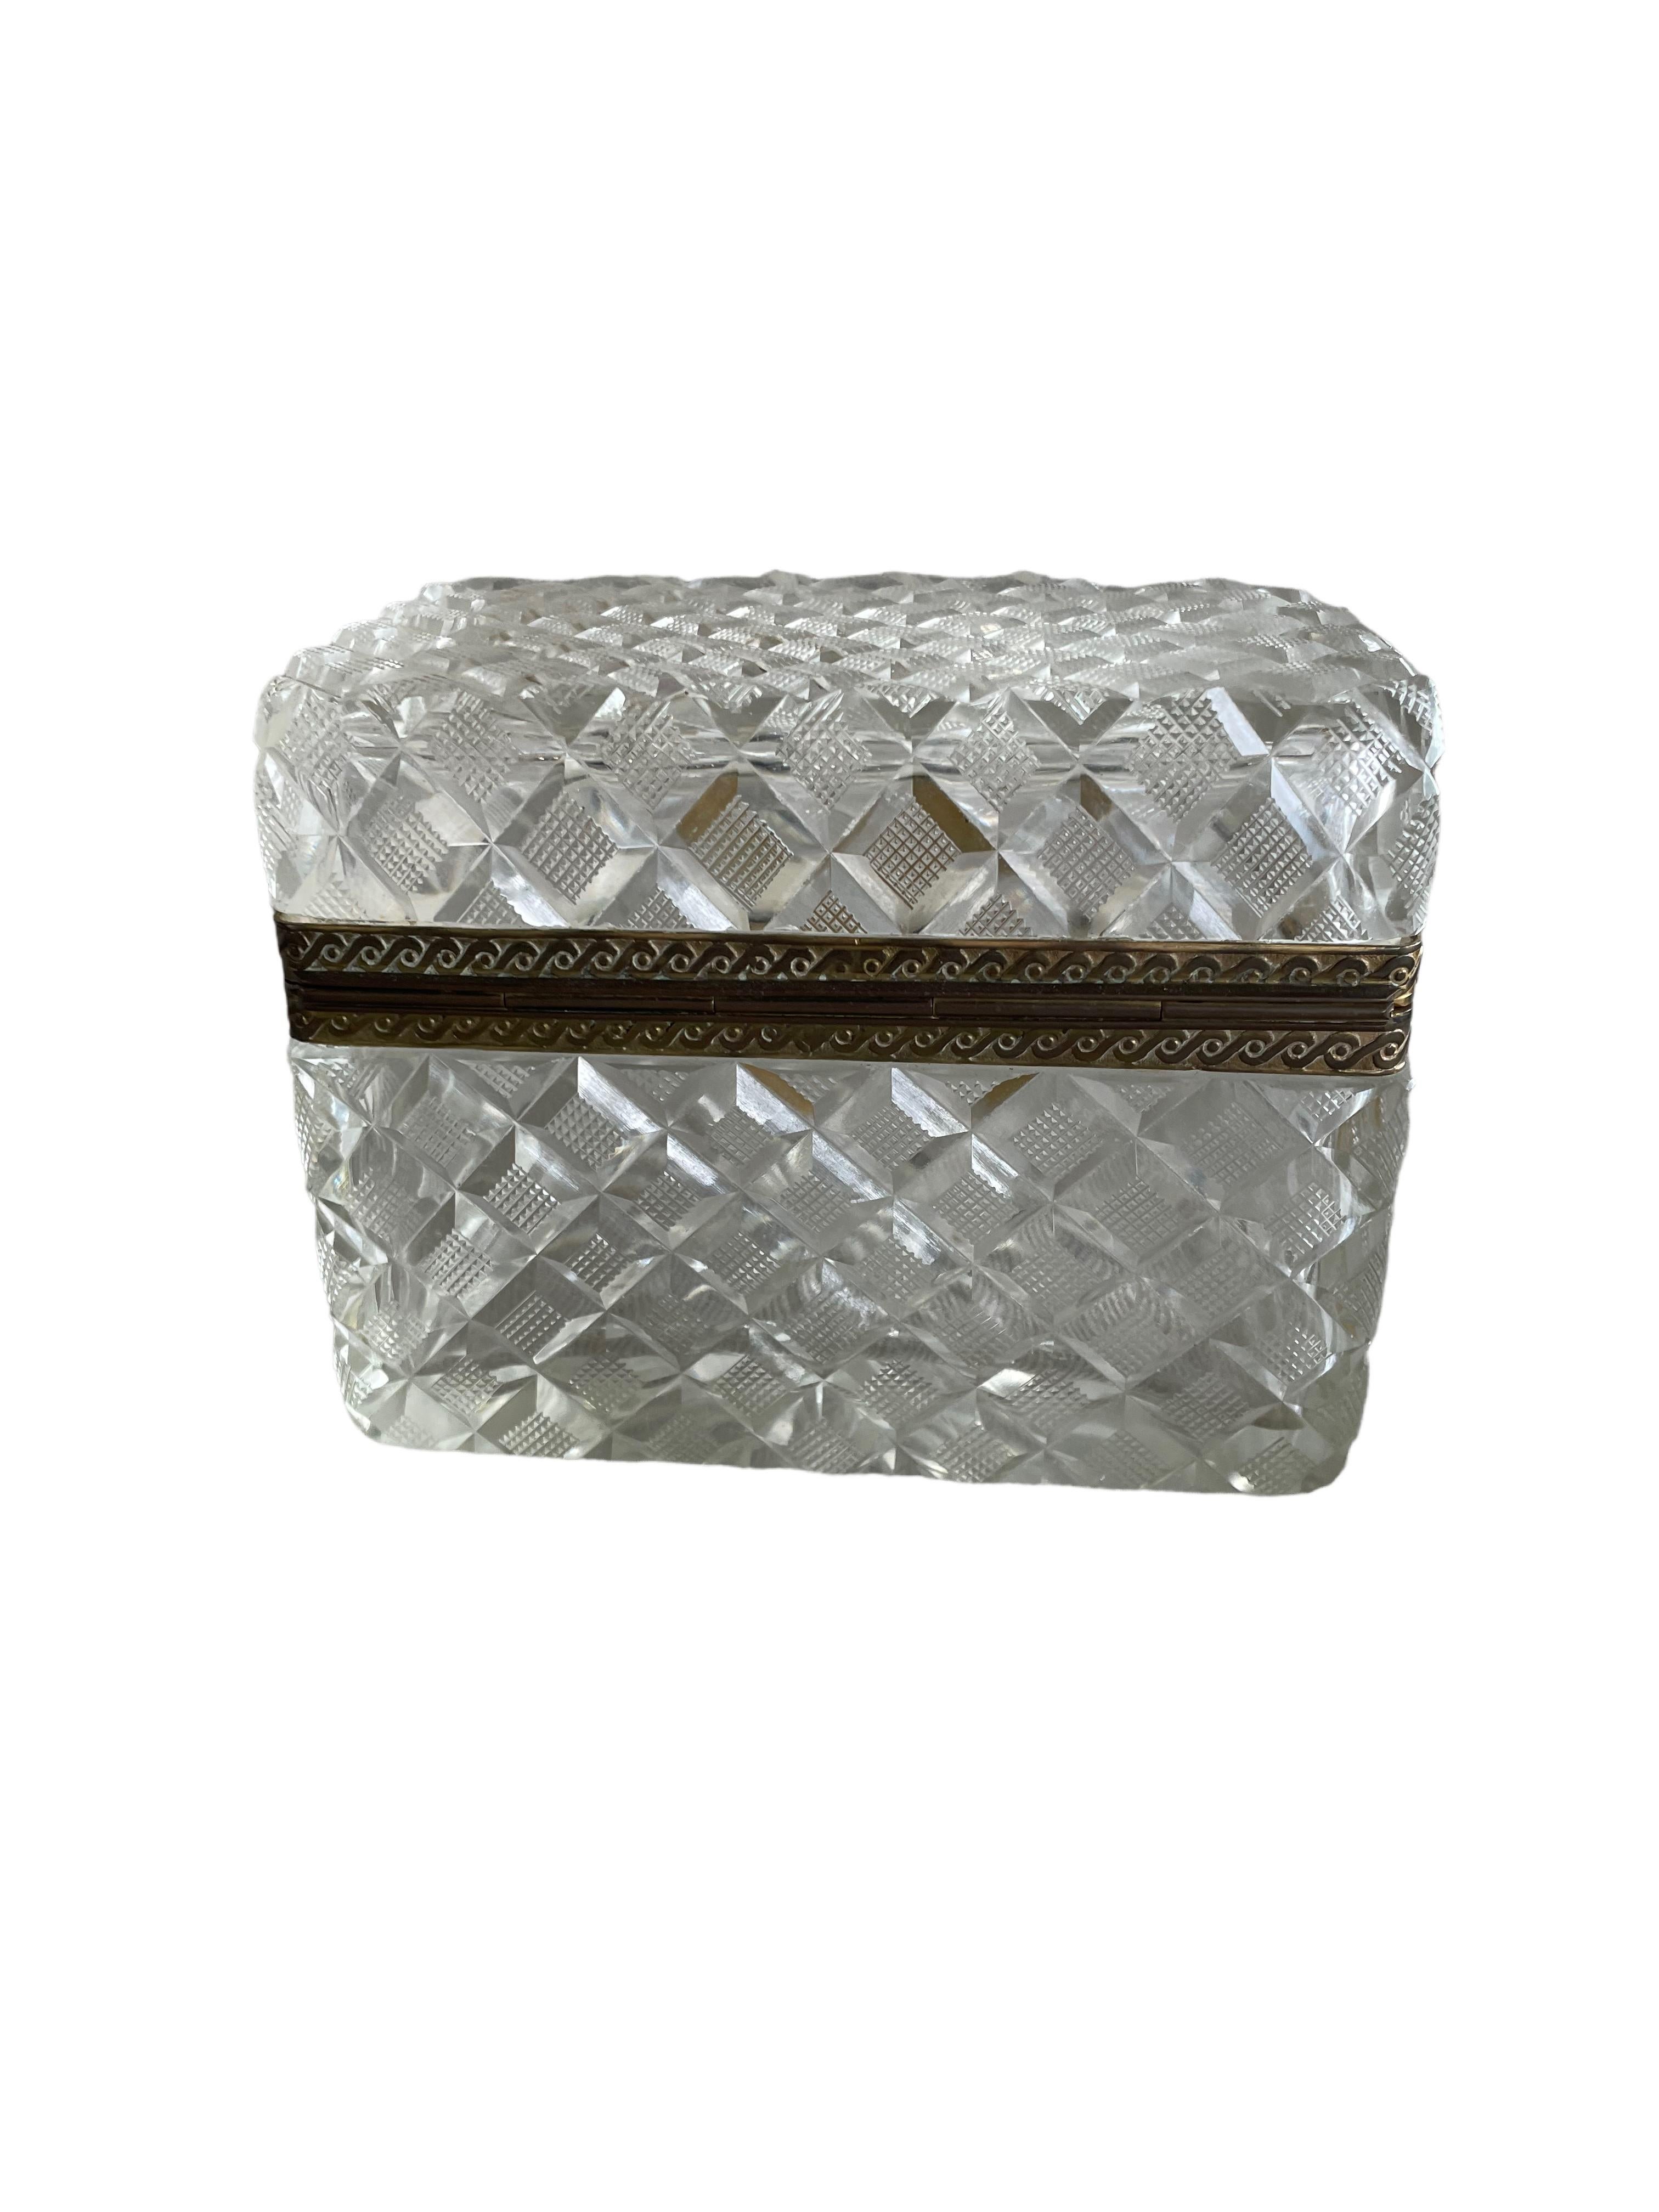 This antique crystal box is a true gem. The cut crystal is mesmerizing, due to its hand-chiseled facets that catch the light reflecting it in a thousand dazzling ways. The antique appeal of this box is further heightened by its detailed Dore Bronze